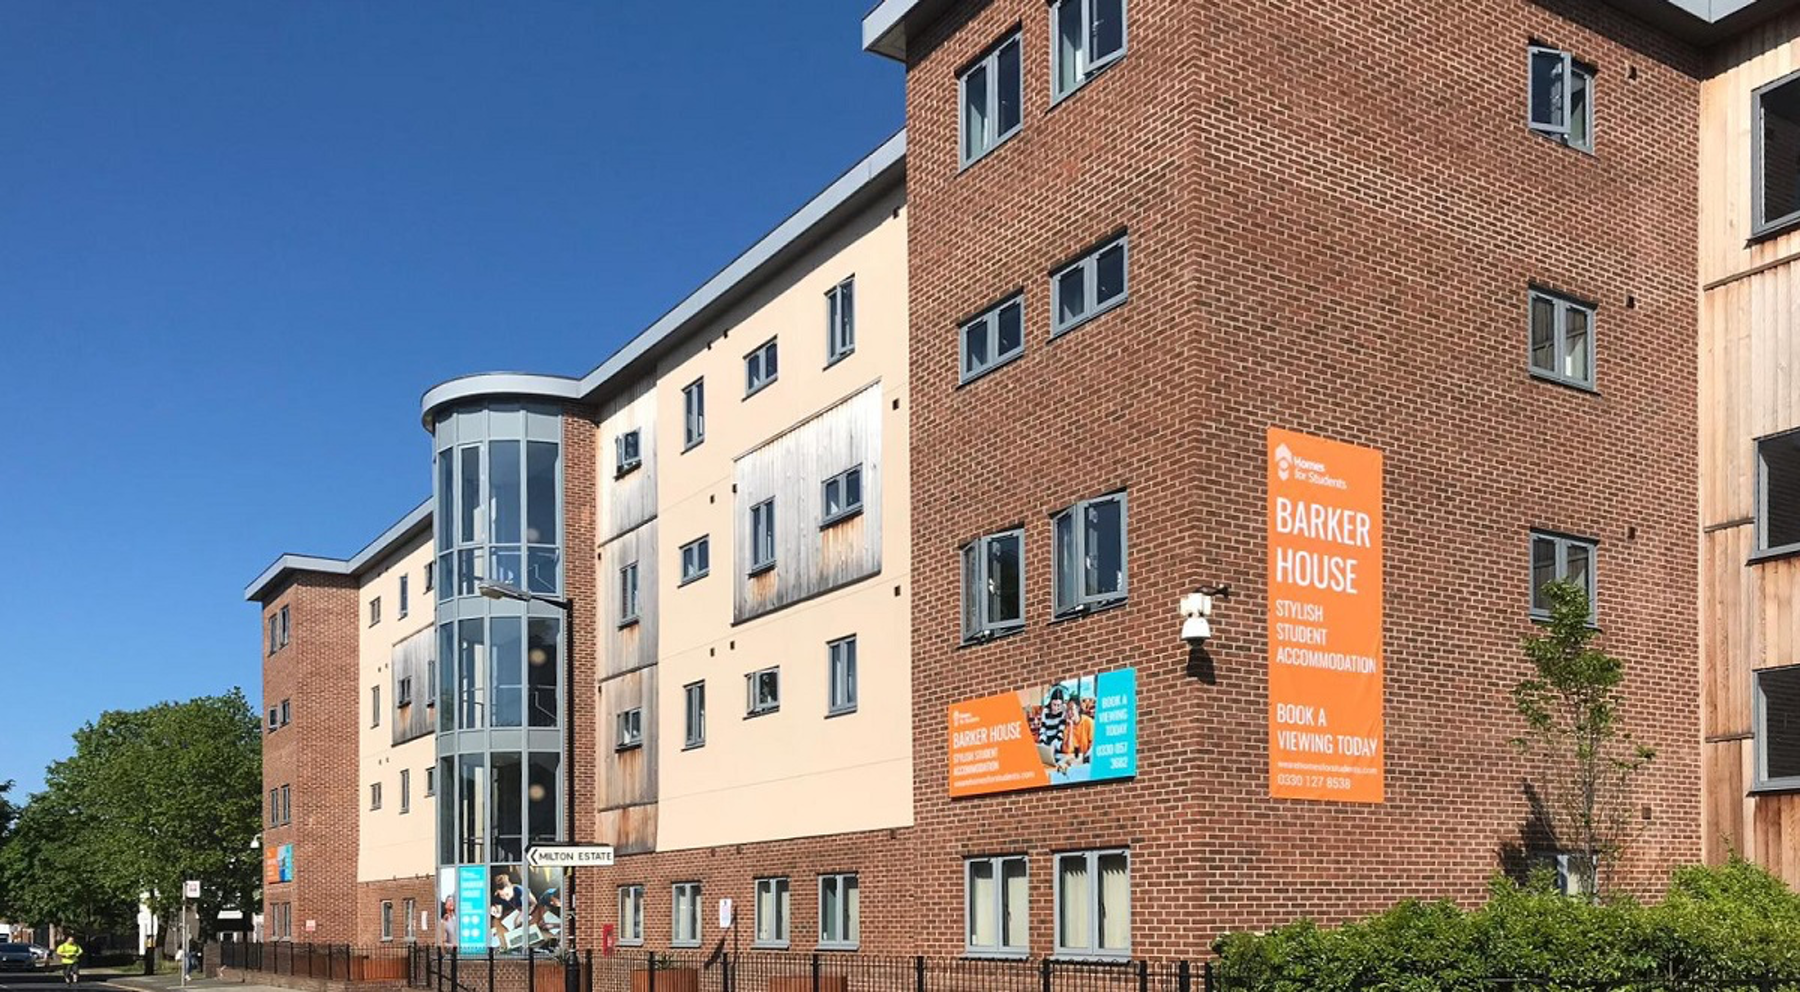 Homes for Students unveils new refurbished property in Newcastle